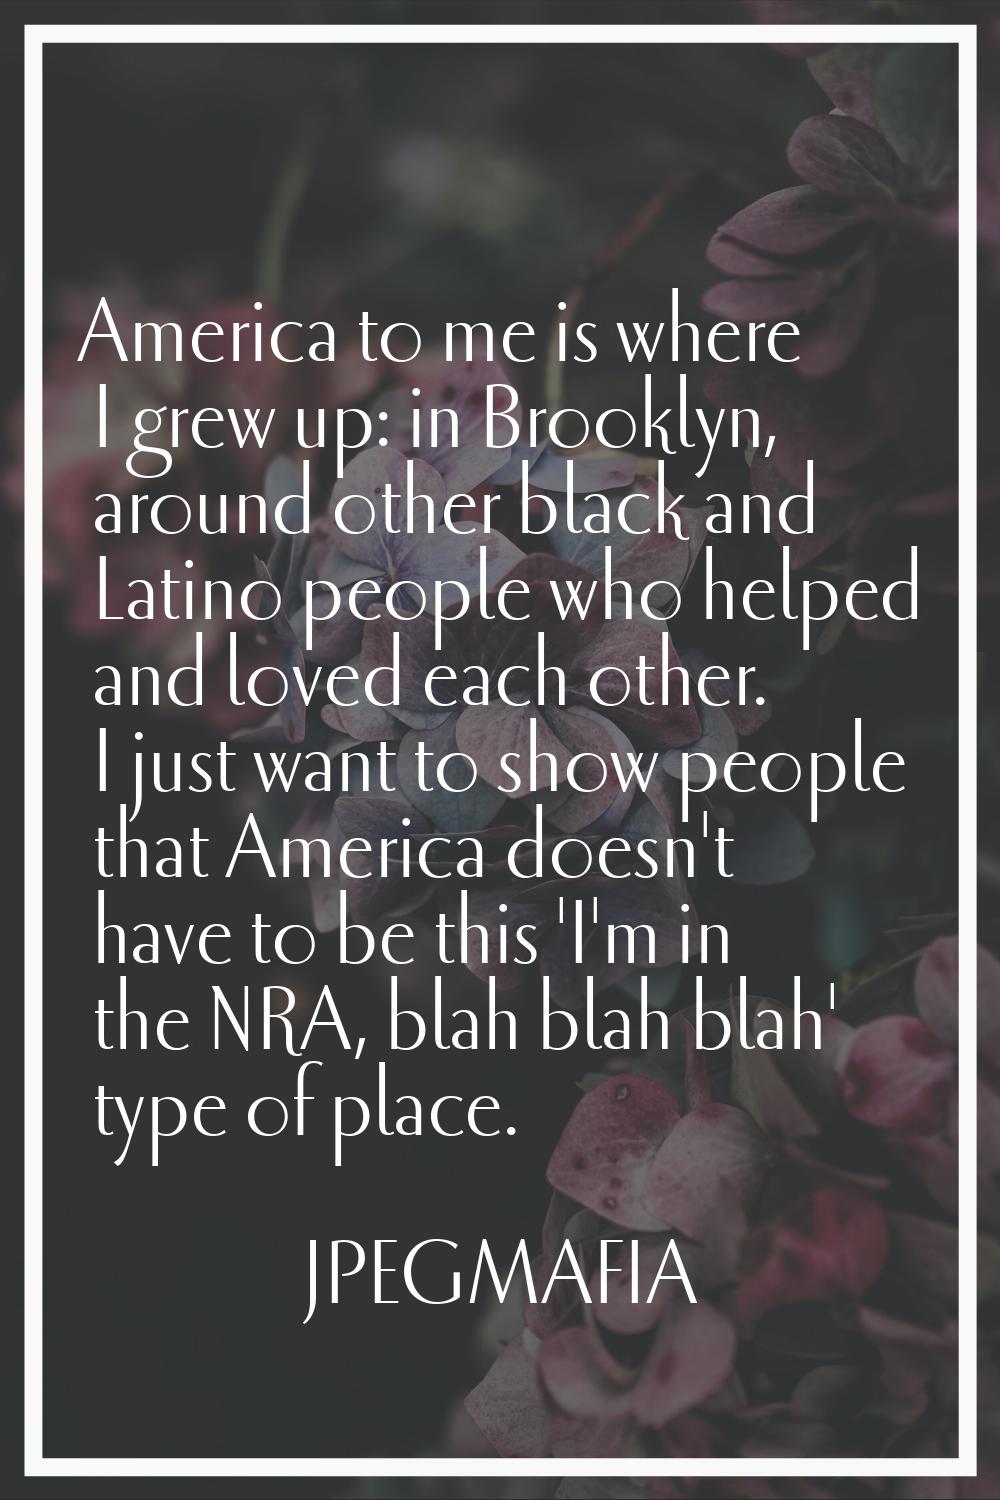 America to me is where I grew up: in Brooklyn, around other black and Latino people who helped and 